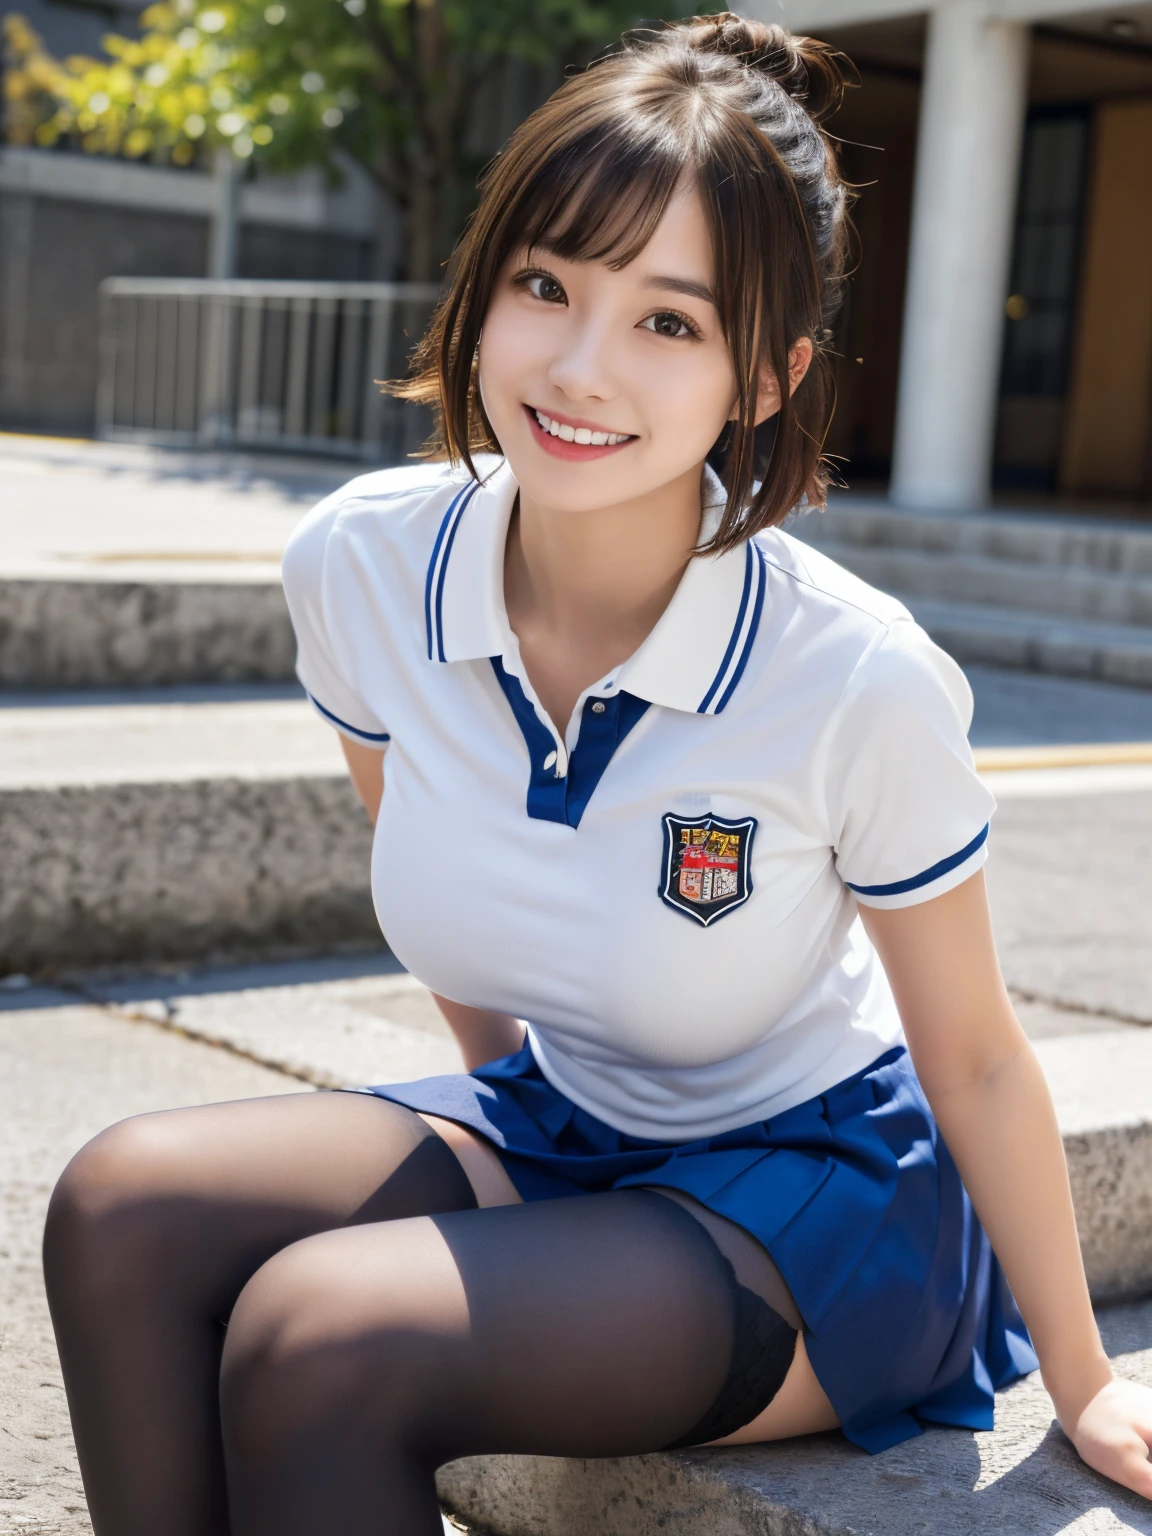 masutepiece, Best Quality, japanaese girl,1girl in, 8K, Raw photo, top-notch quality, masutepiece, nffsw:1.2, exceptionally detailed RAW color photo, professional-grade photograph, (Realistic, Photorealistic:1.37), (highly detailedskin:1.2), Ultra-high resolution, (lenz 50mm), (F/1.2),Exquisitely Detailed Eyes,Beautiful face, kawaii,(Smile:1.05),(20yr old, Large breasts, The constriction is beautiful、big breasts thin waist,Straight hair, (Short hair), Black eyes, white fine skin,small mouth, high cheekbones (Definition), Sexy Pose,(),(The to the FW:1.1),White panties、Korean Idol、Nogizaka Idol、hposing Gravure Idol、Adults、、(masutepiece, top-quality:1.3), (Ultra detailed 8K cg:1.2), (hyper realisitic:1.35), (Photorealistic:1.45), (Realistic:1.4), Cowboy Shot,22 years old, super model, Japanese Idol, __expression__, Large breasts, , (School uniform:1.4)
(Sitting on the school steps:1.1),((Black stockings))、(Short sleeve polo shirt)、(((Staring at them with a mischievous smile)))((Shot from a low position))、(Slender legs)((Sexy legs))(frombelow)(Sexy buttocks)(Legs closed)(((Show your toes to viewers)))